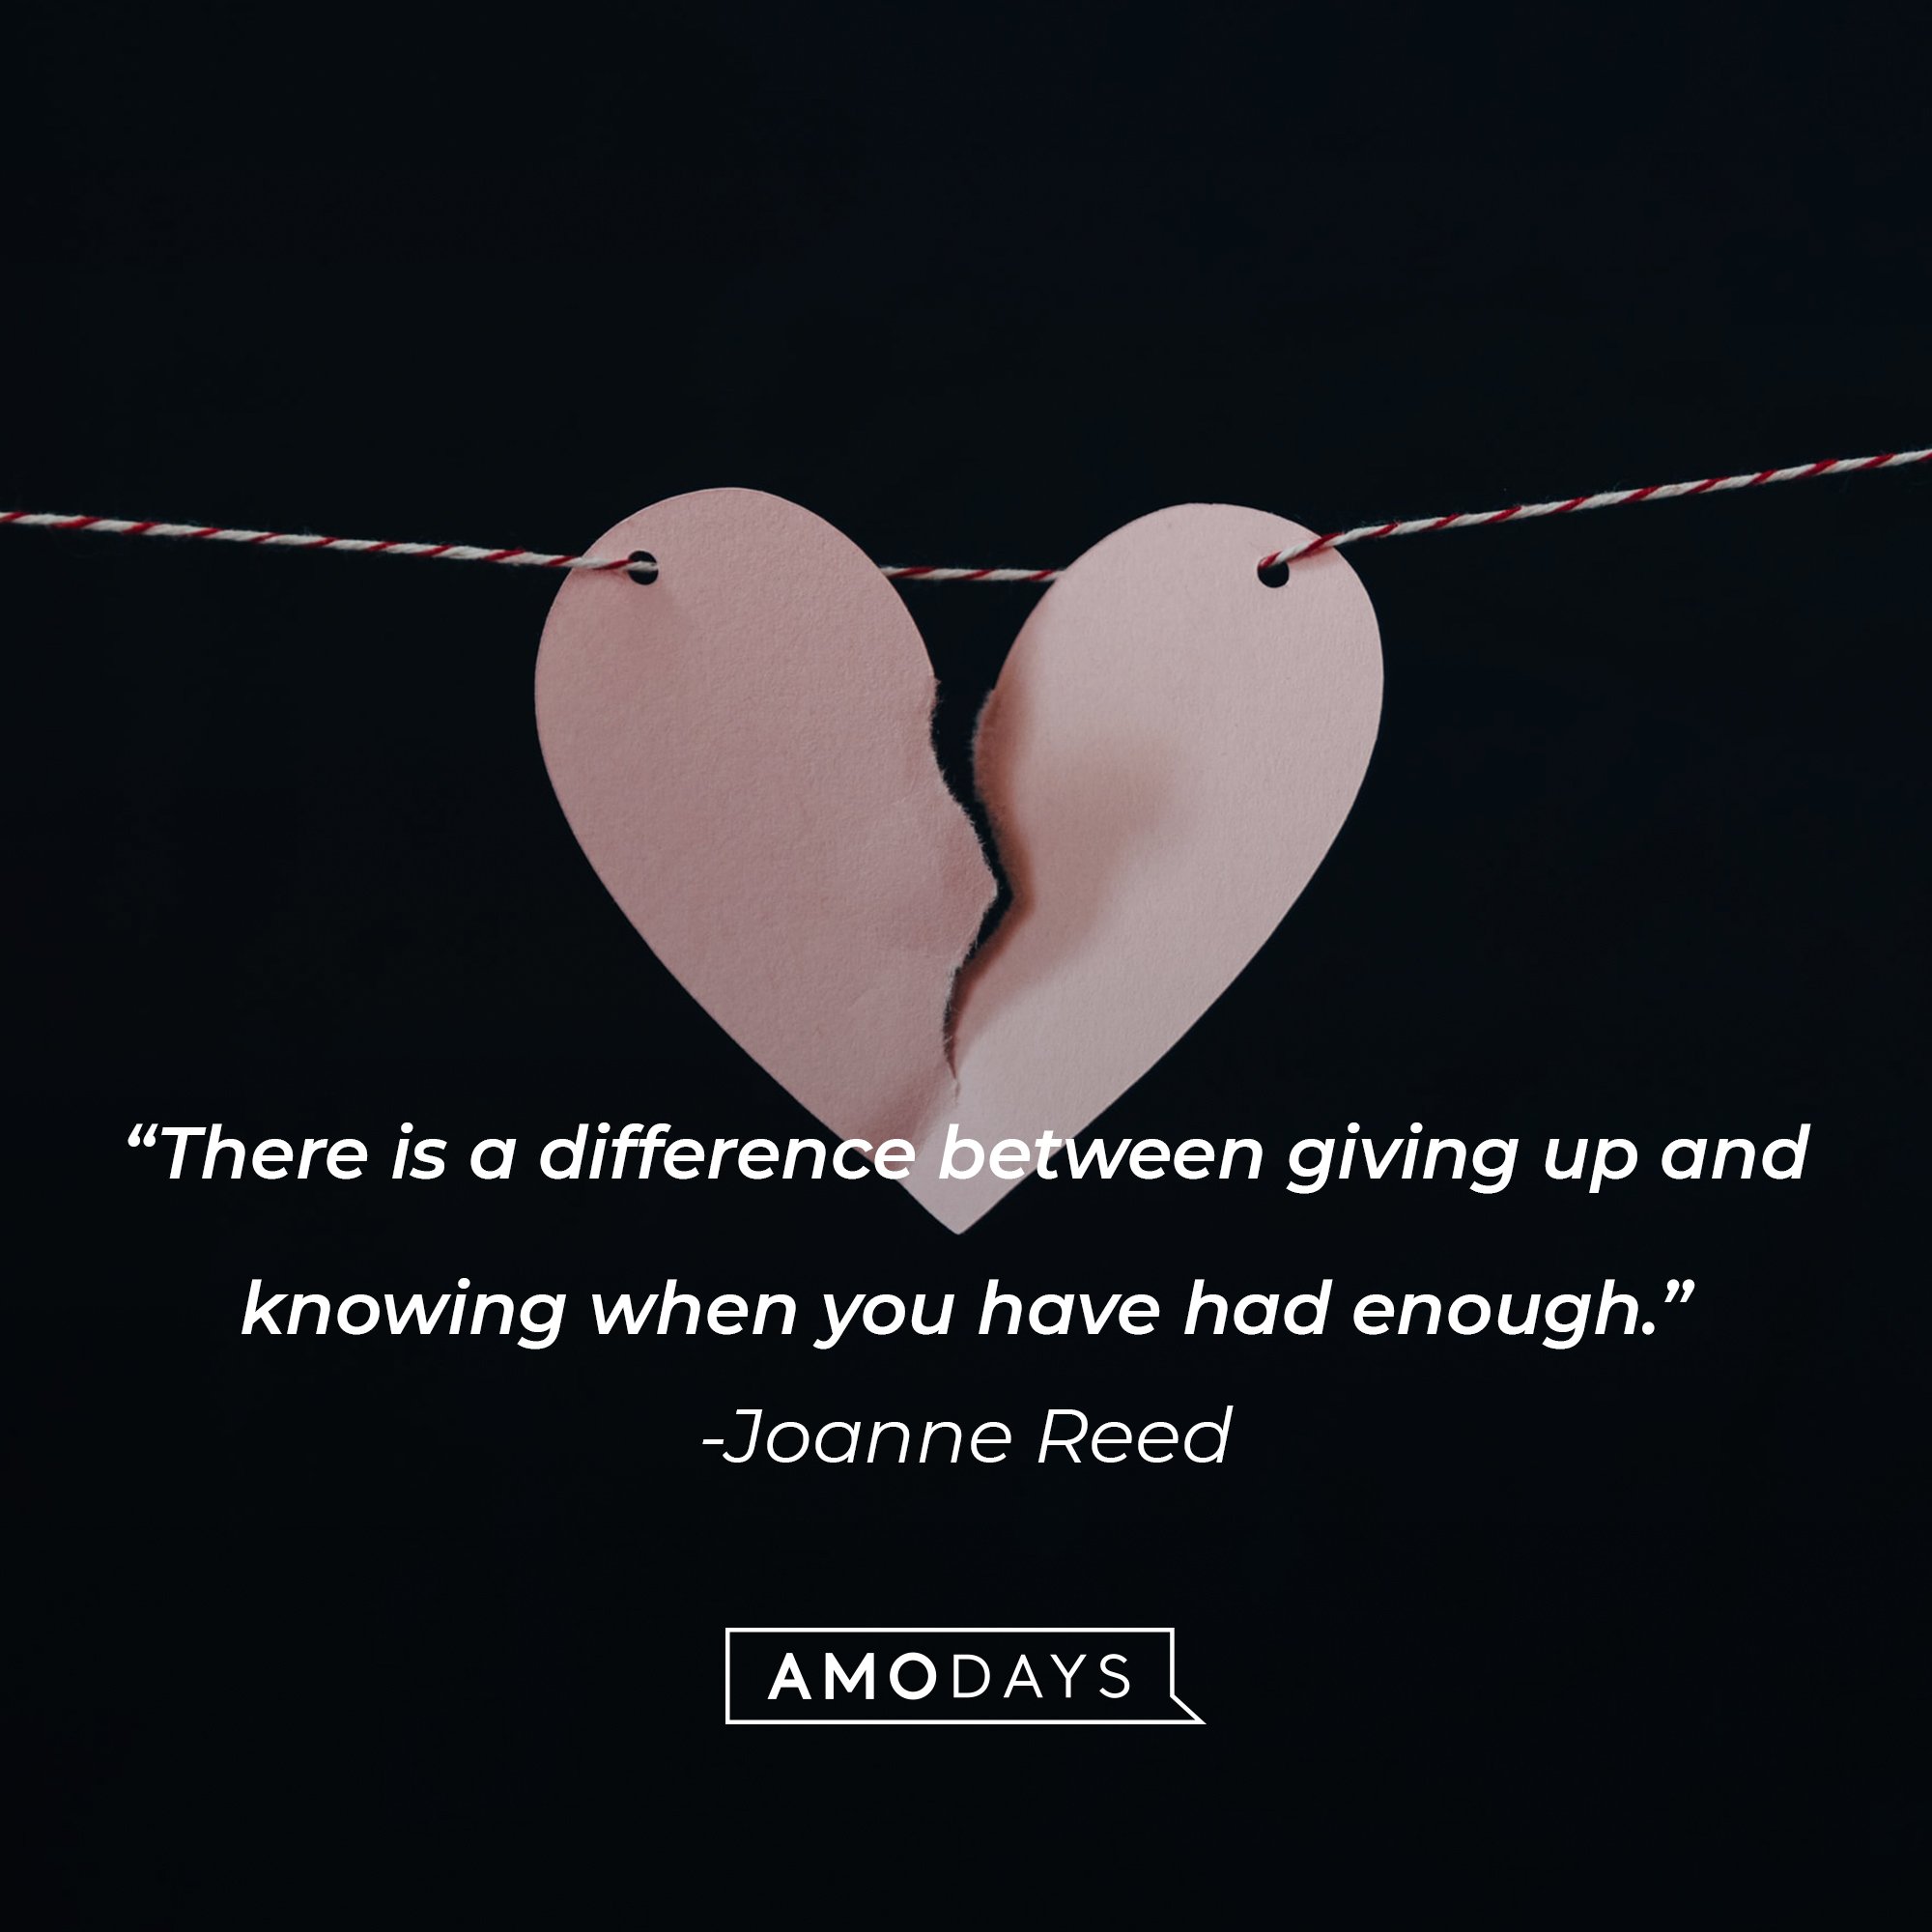 Joanne Reed’s quote: "There is a difference between giving up and knowing when you have had enough." | Image: AmoDays